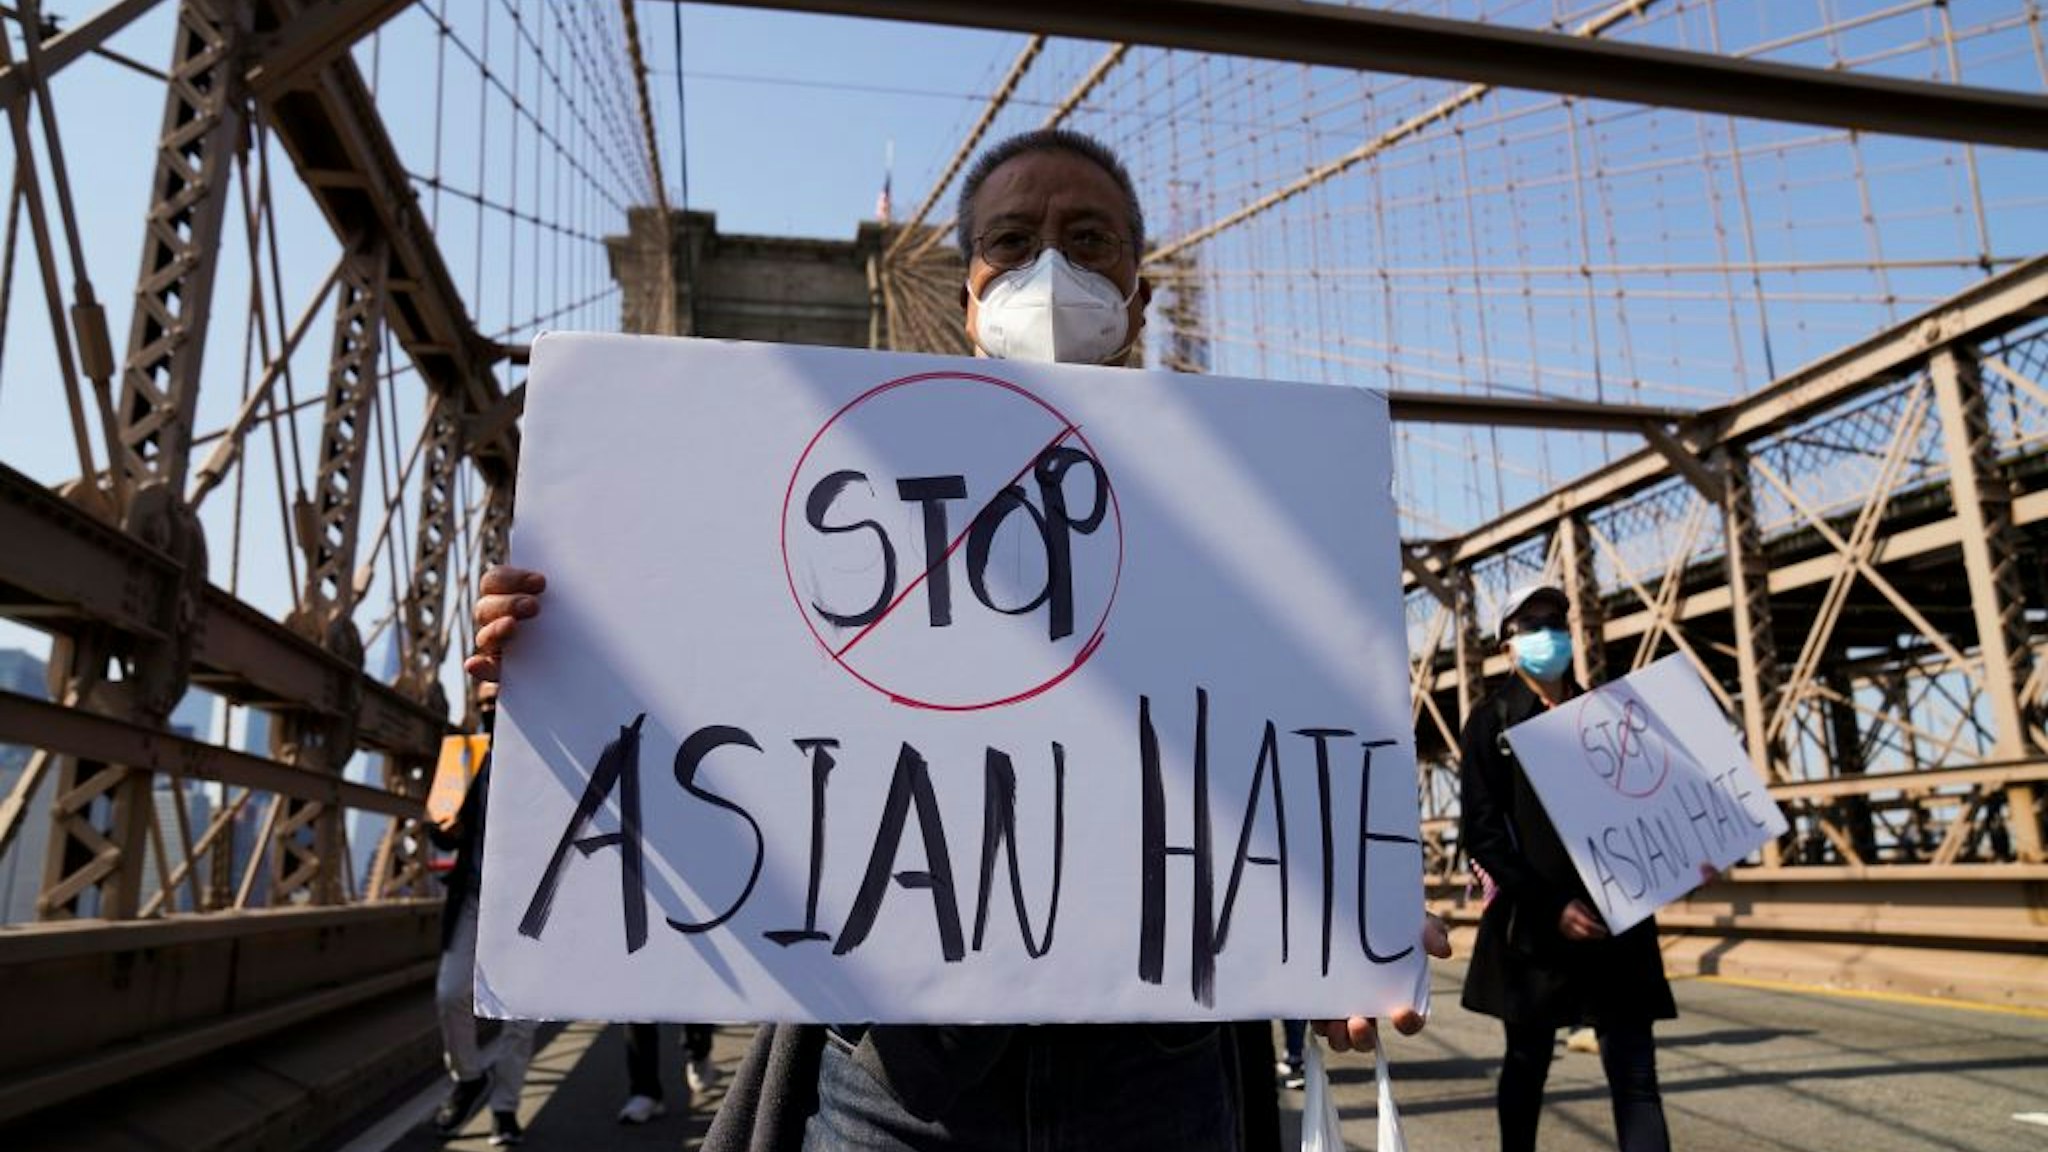 People march to protest against anti-Asian hate crimes on Brooklyn Bridge in New York, the United States, April 4, 2021.